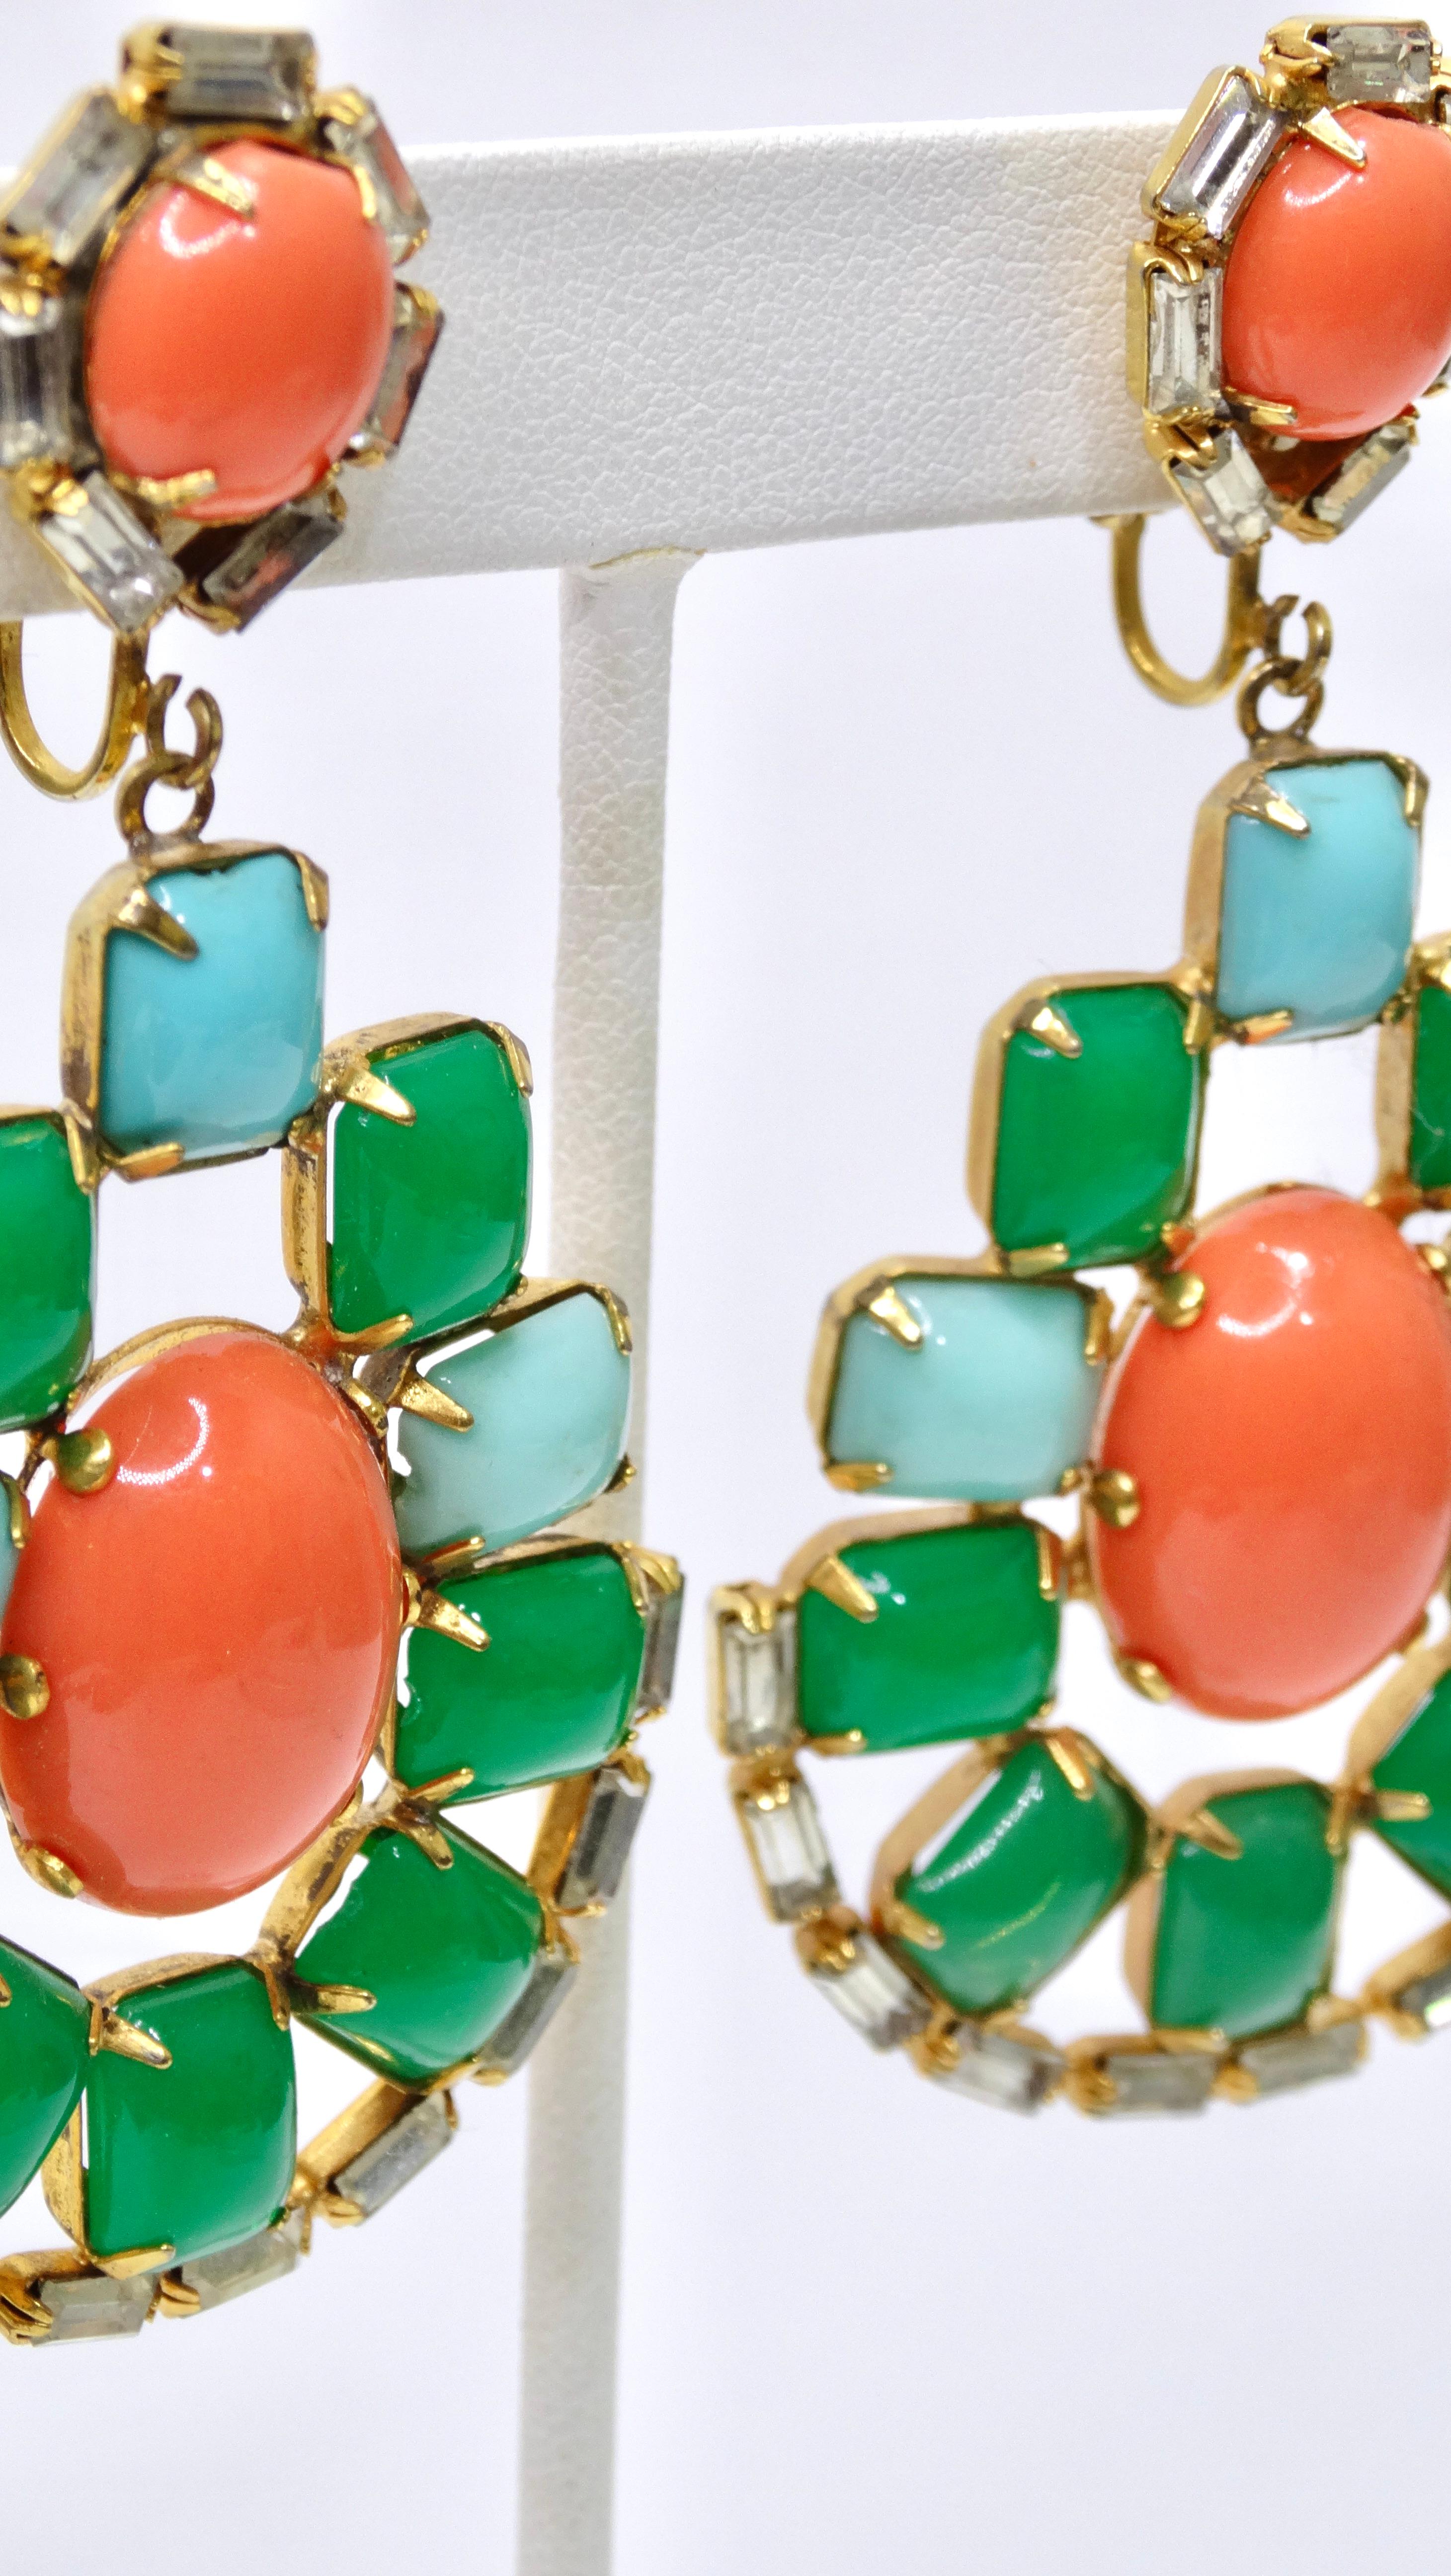 Get your hands on this elegant but youthful pair of earrings! No one will be able to resist complimenting you on these intricate adornments! Spice up any outfit by adding these fully jeweled earrings to your outfit. These earrings are large in size,